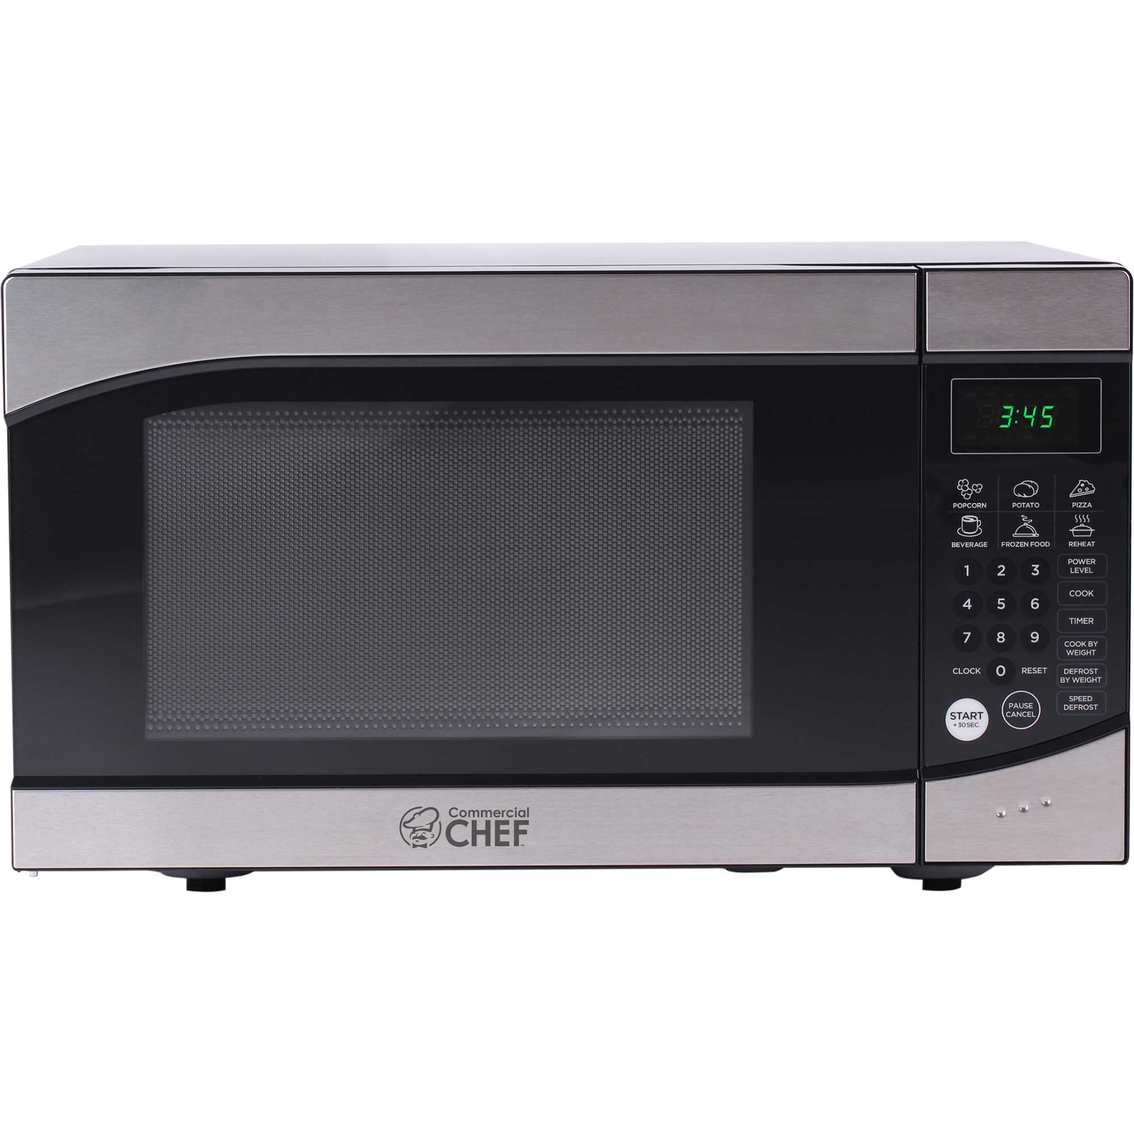 Commercial Chef .9 cu. ft. Counter Top Microwave - Image 2 of 8